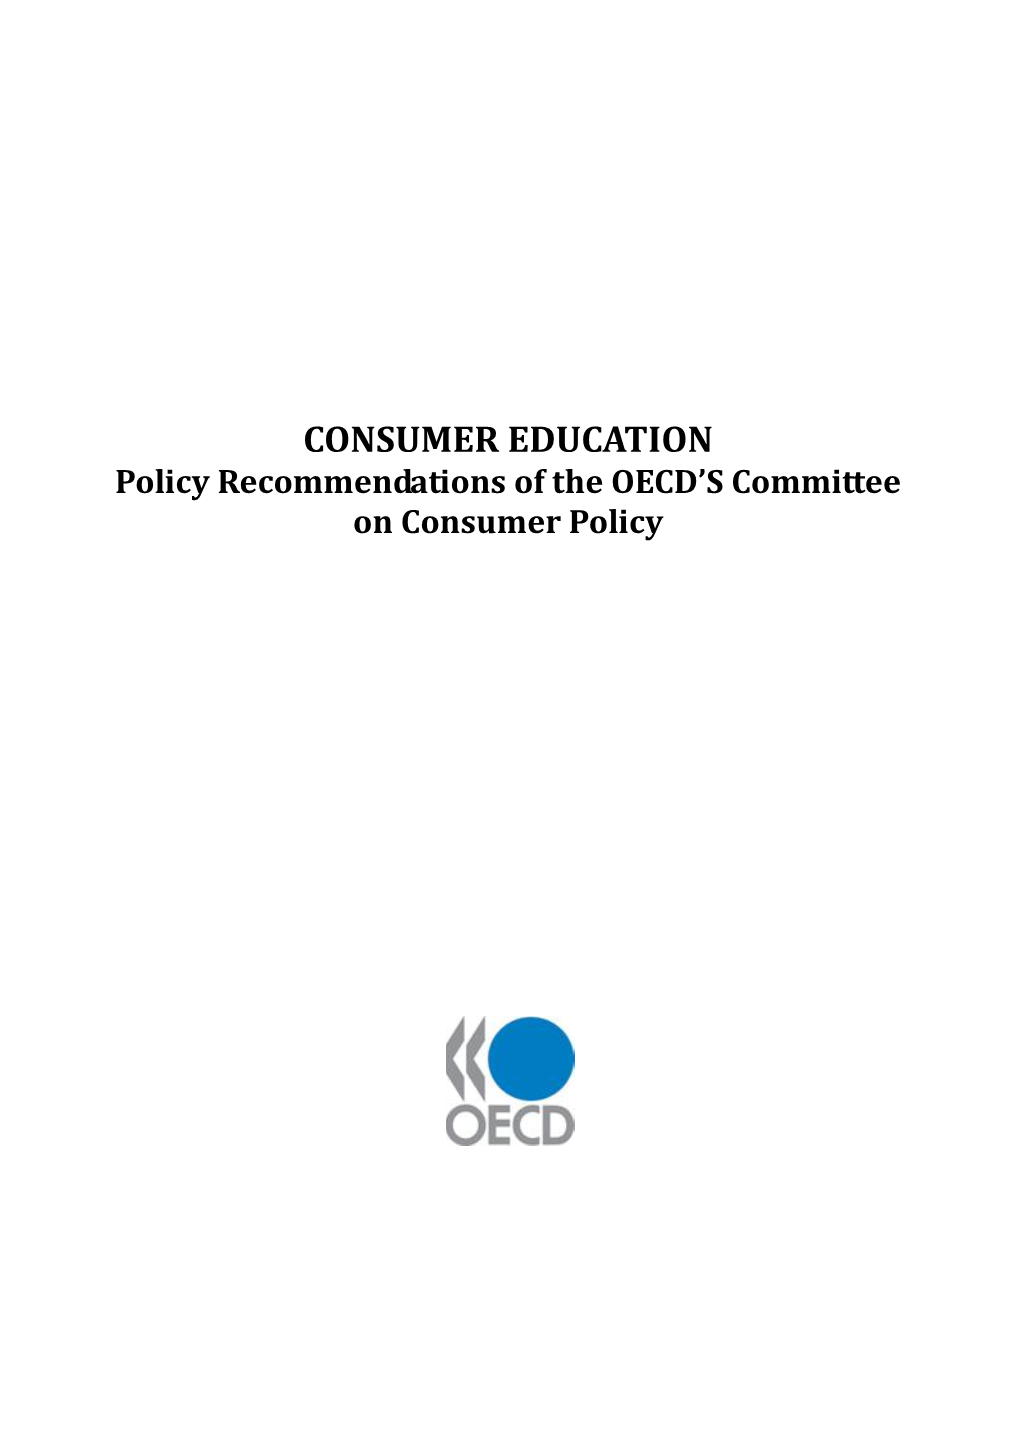 CONSUMER EDUCATION Policy Recommendations of the OECD’S Committee on Consumer Policy